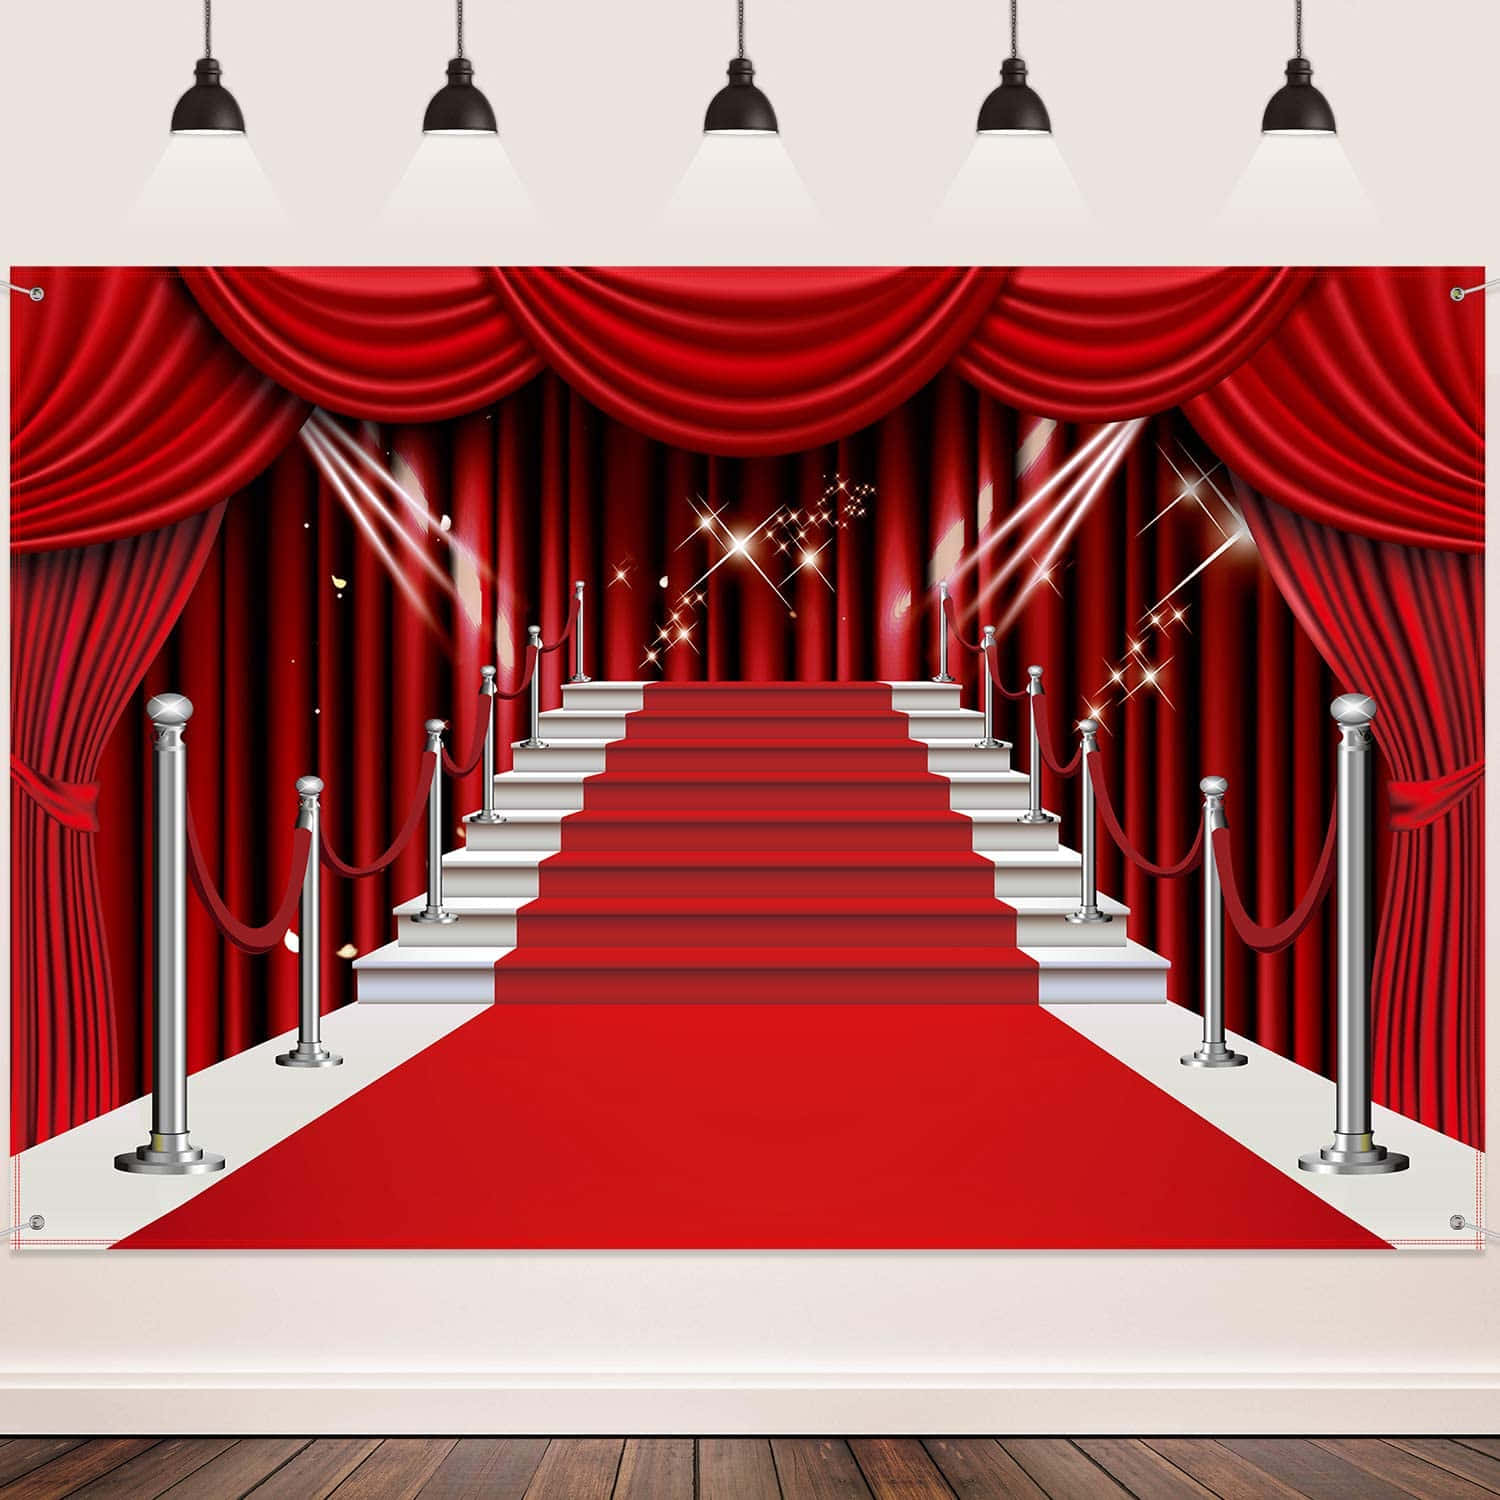 Red Carpet Banner With Stairs And Red Carpet